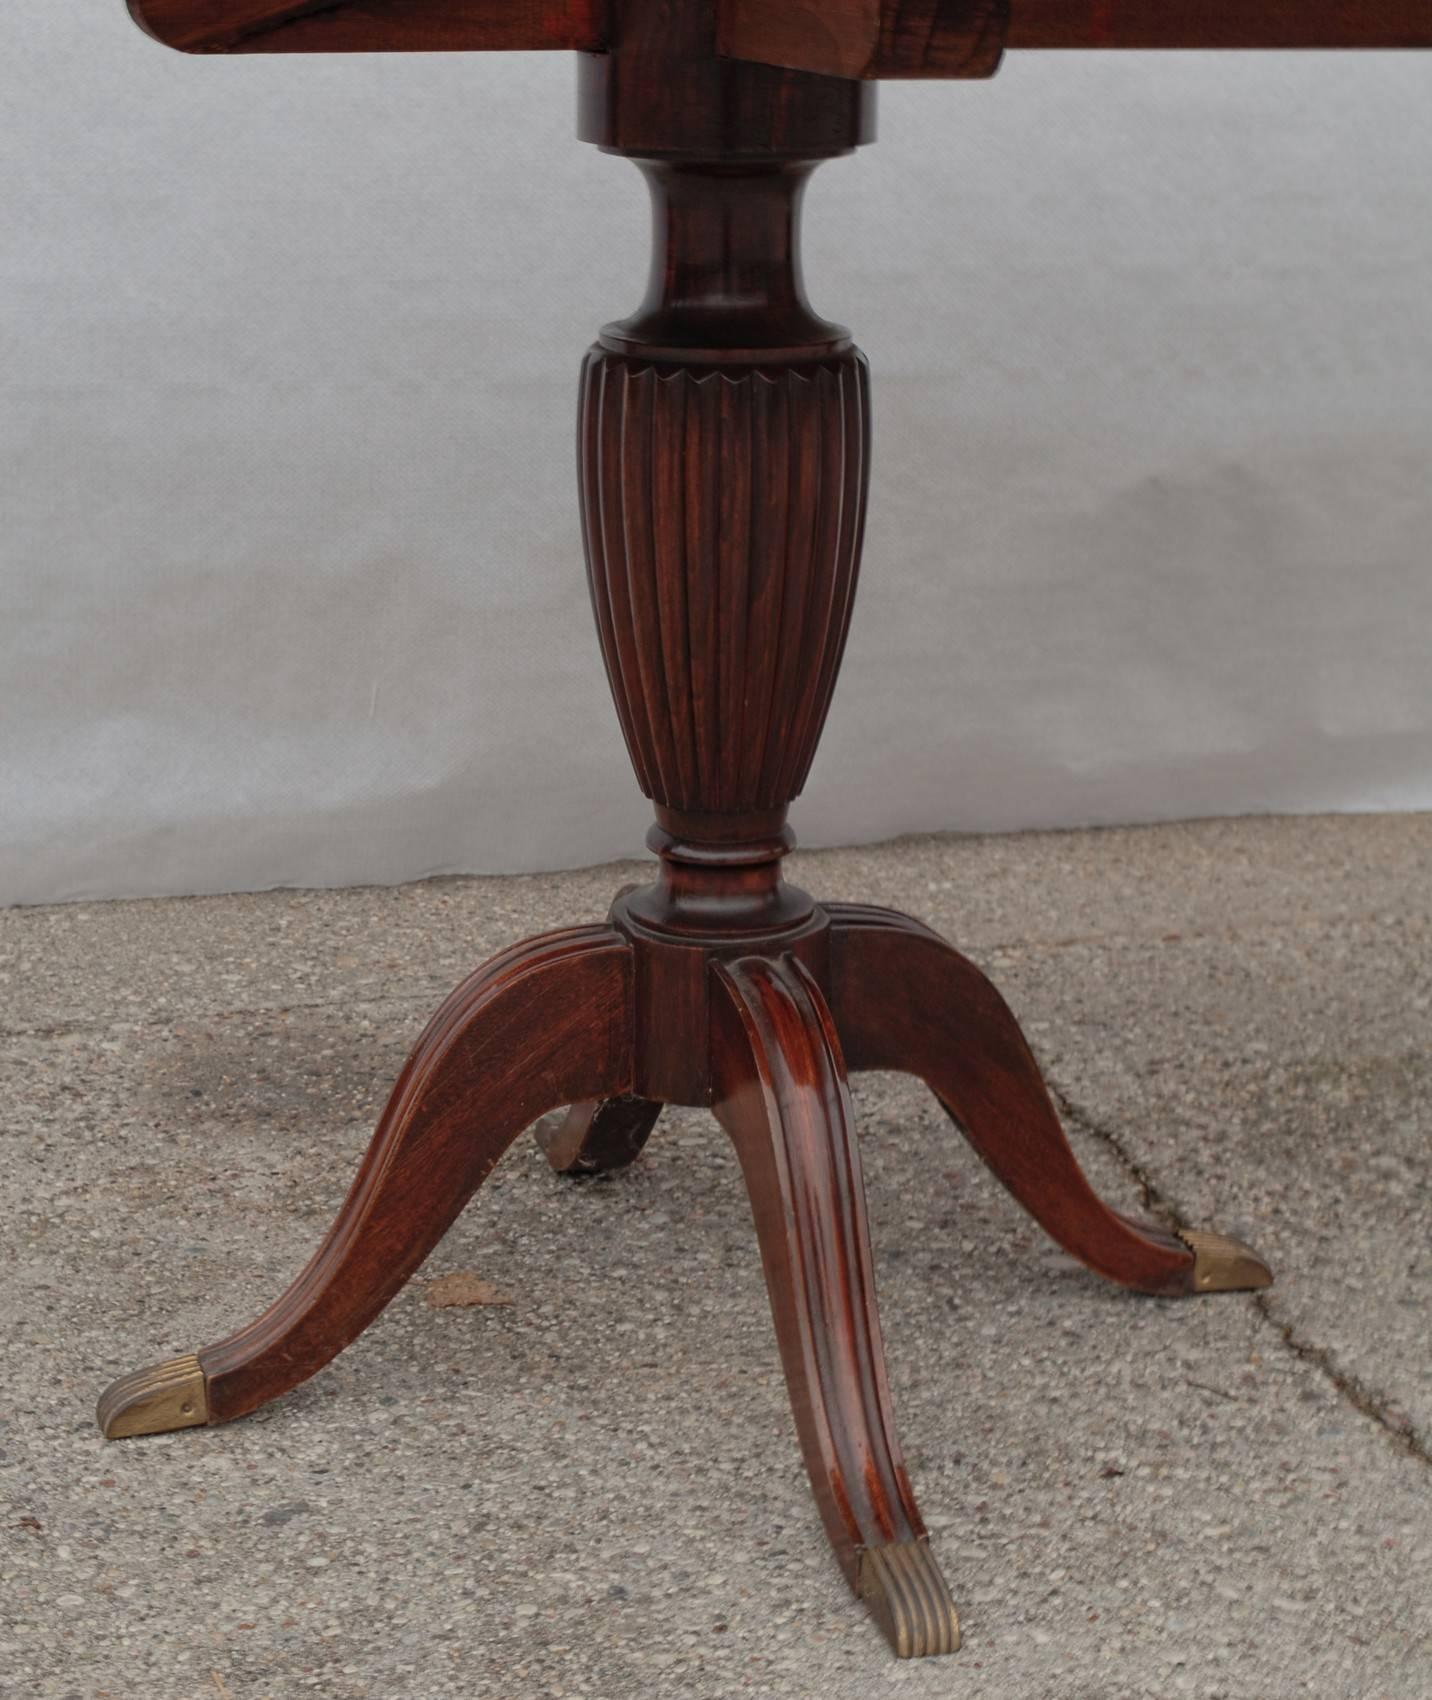 It's a Regency style table, either pre owned or made in Cantù area in the 1950s. I am not expert of the period and it came in just becuse the owner of the chairs did not want to sell the chairs separately.

The two pillars have fluted carvings and